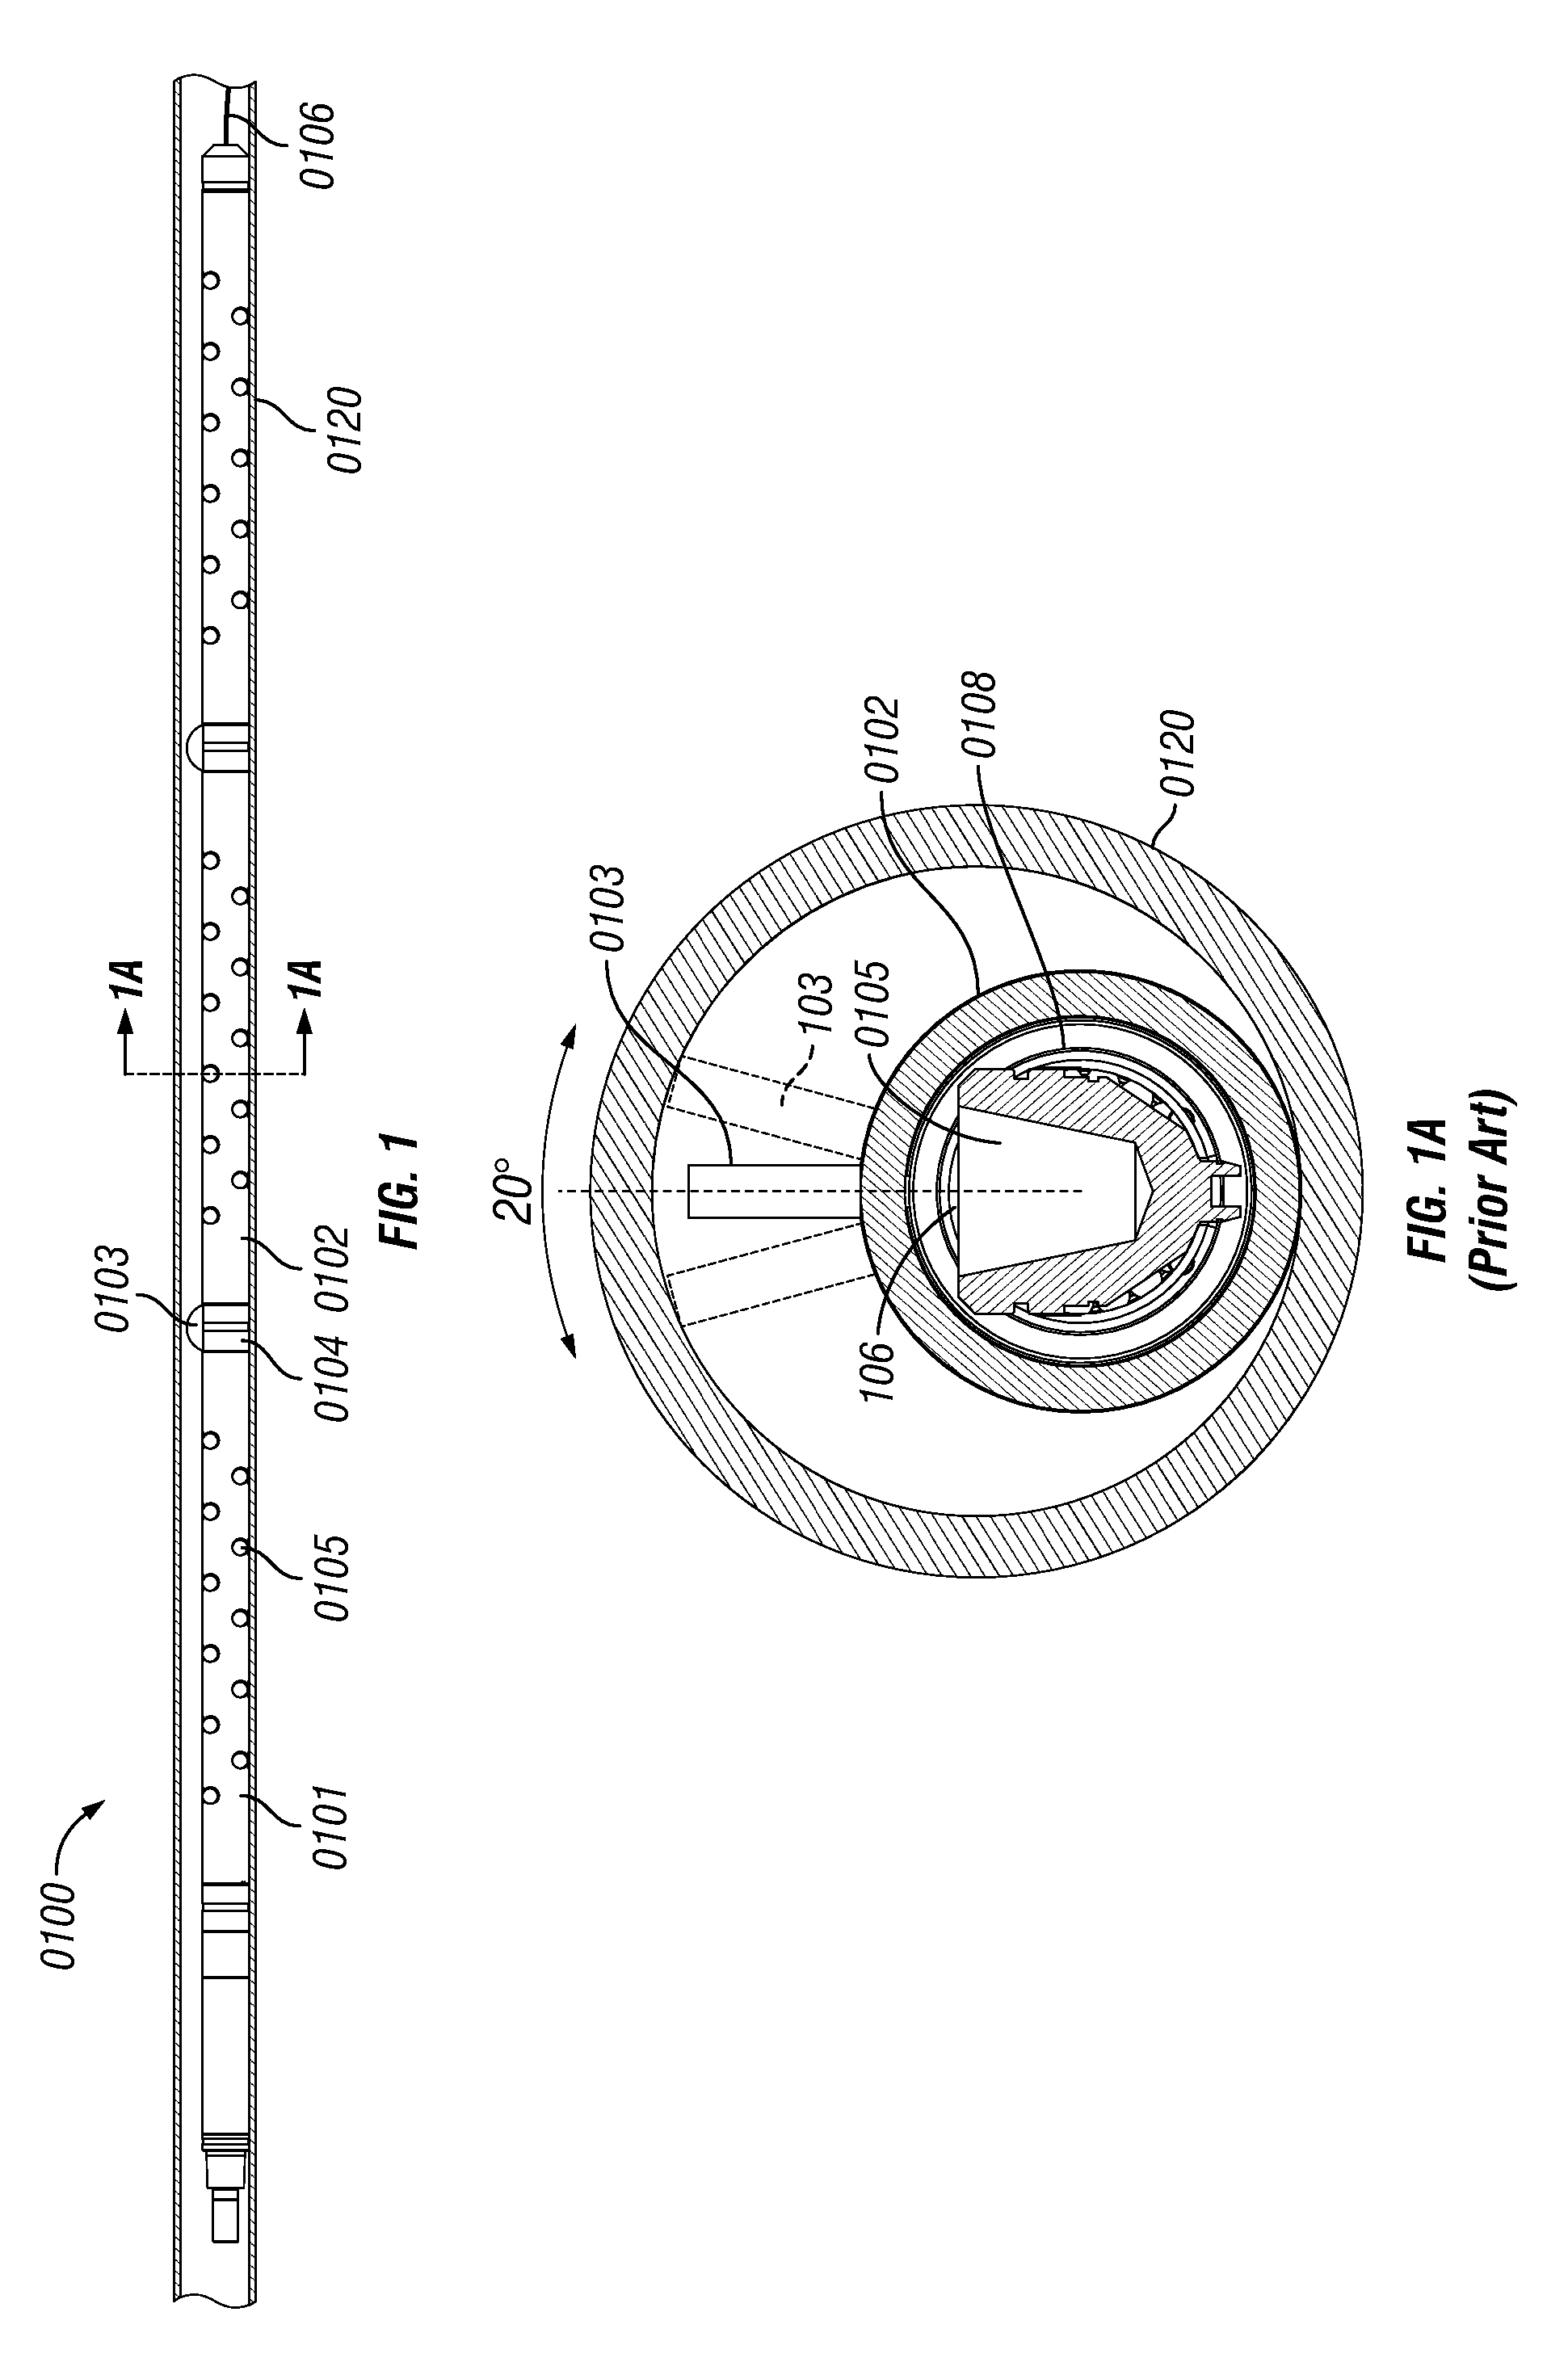 Externally-orientated internally-corrected perforating gun system and method